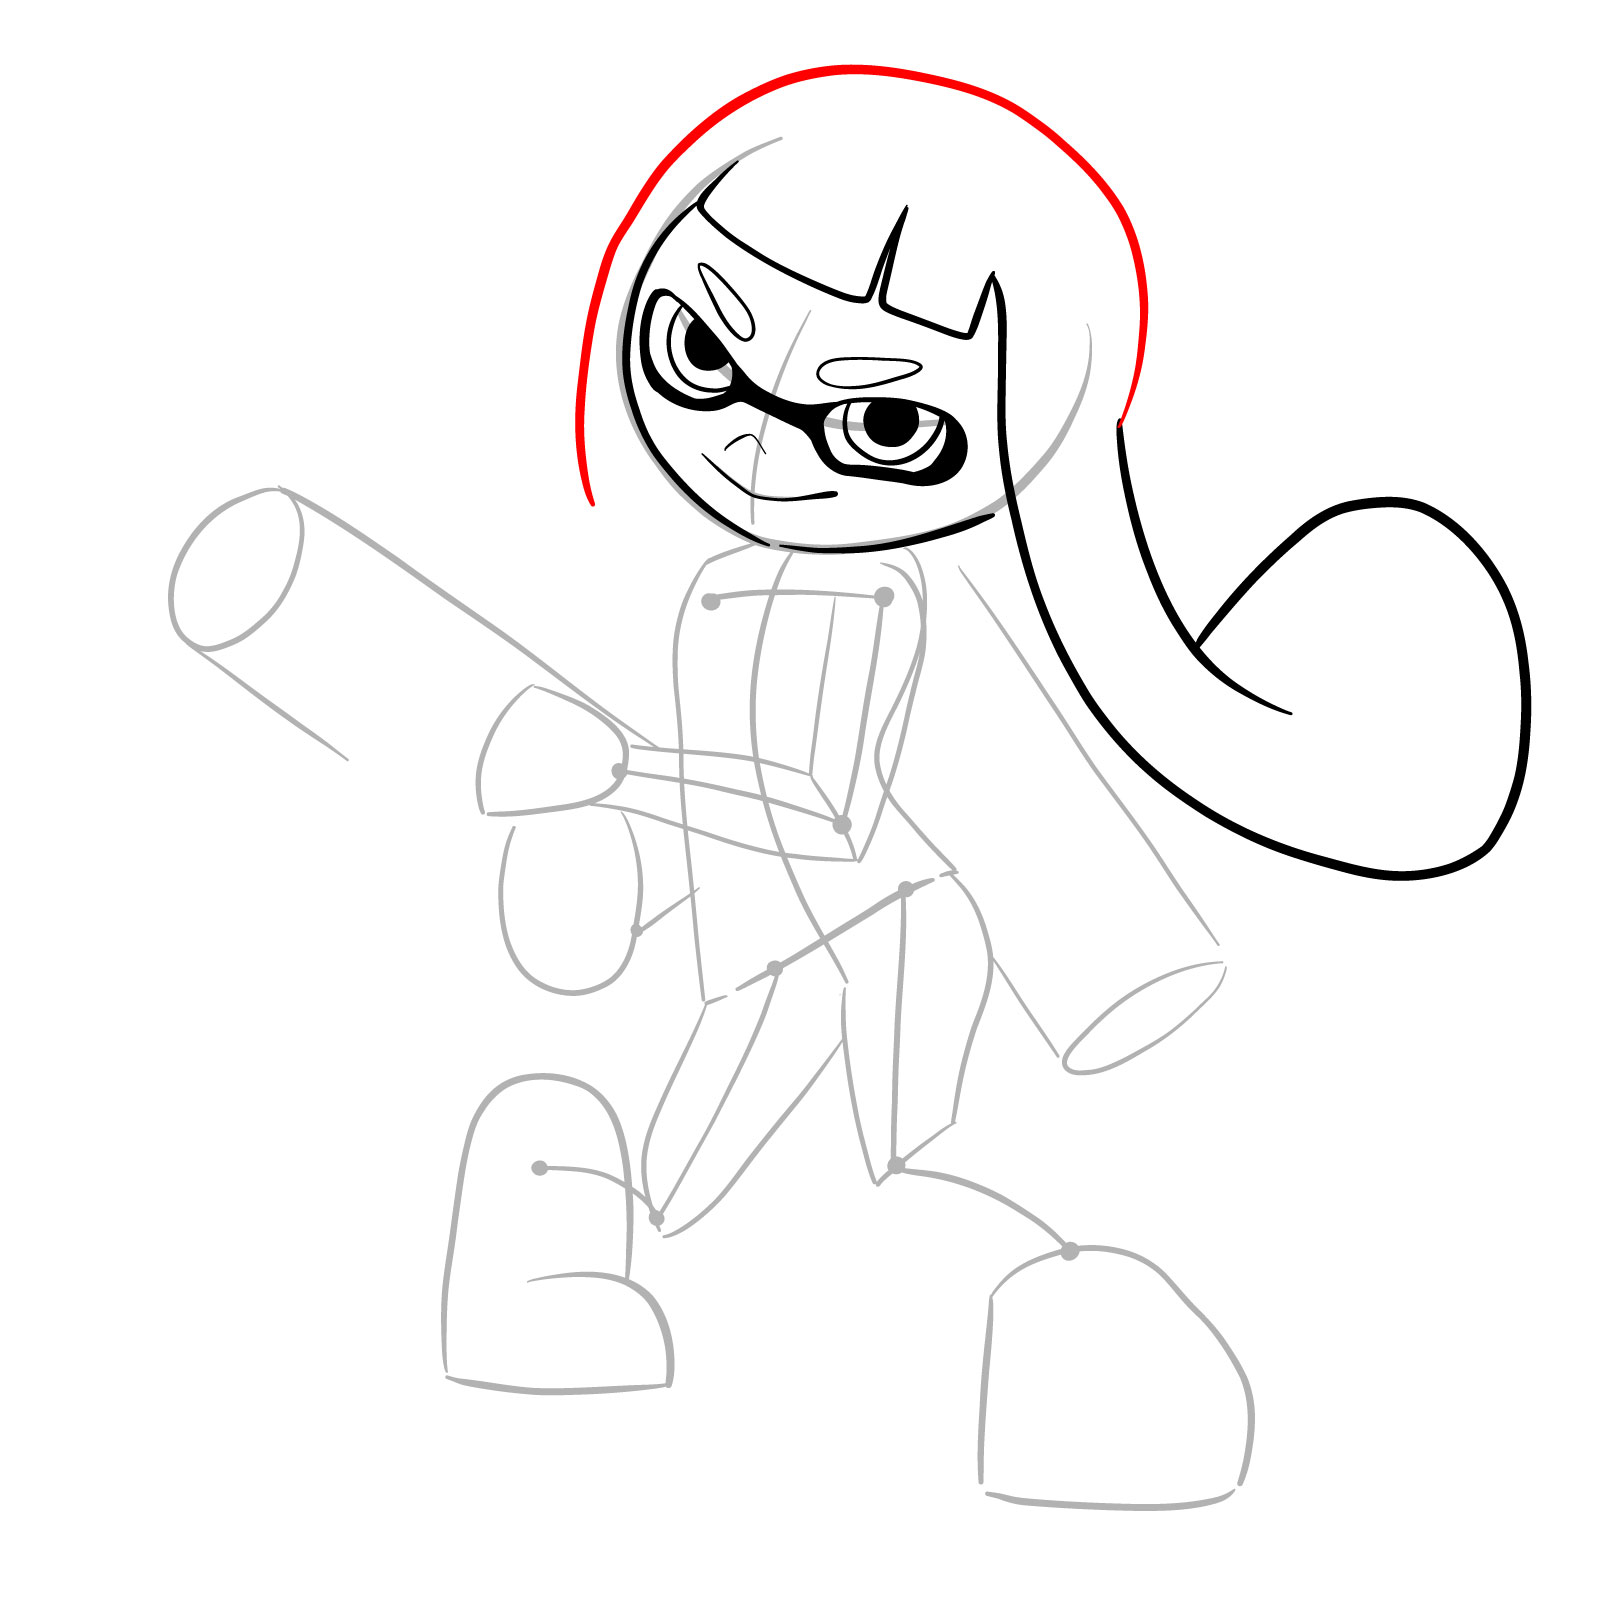 How to draw an Inkling Girl - step 10